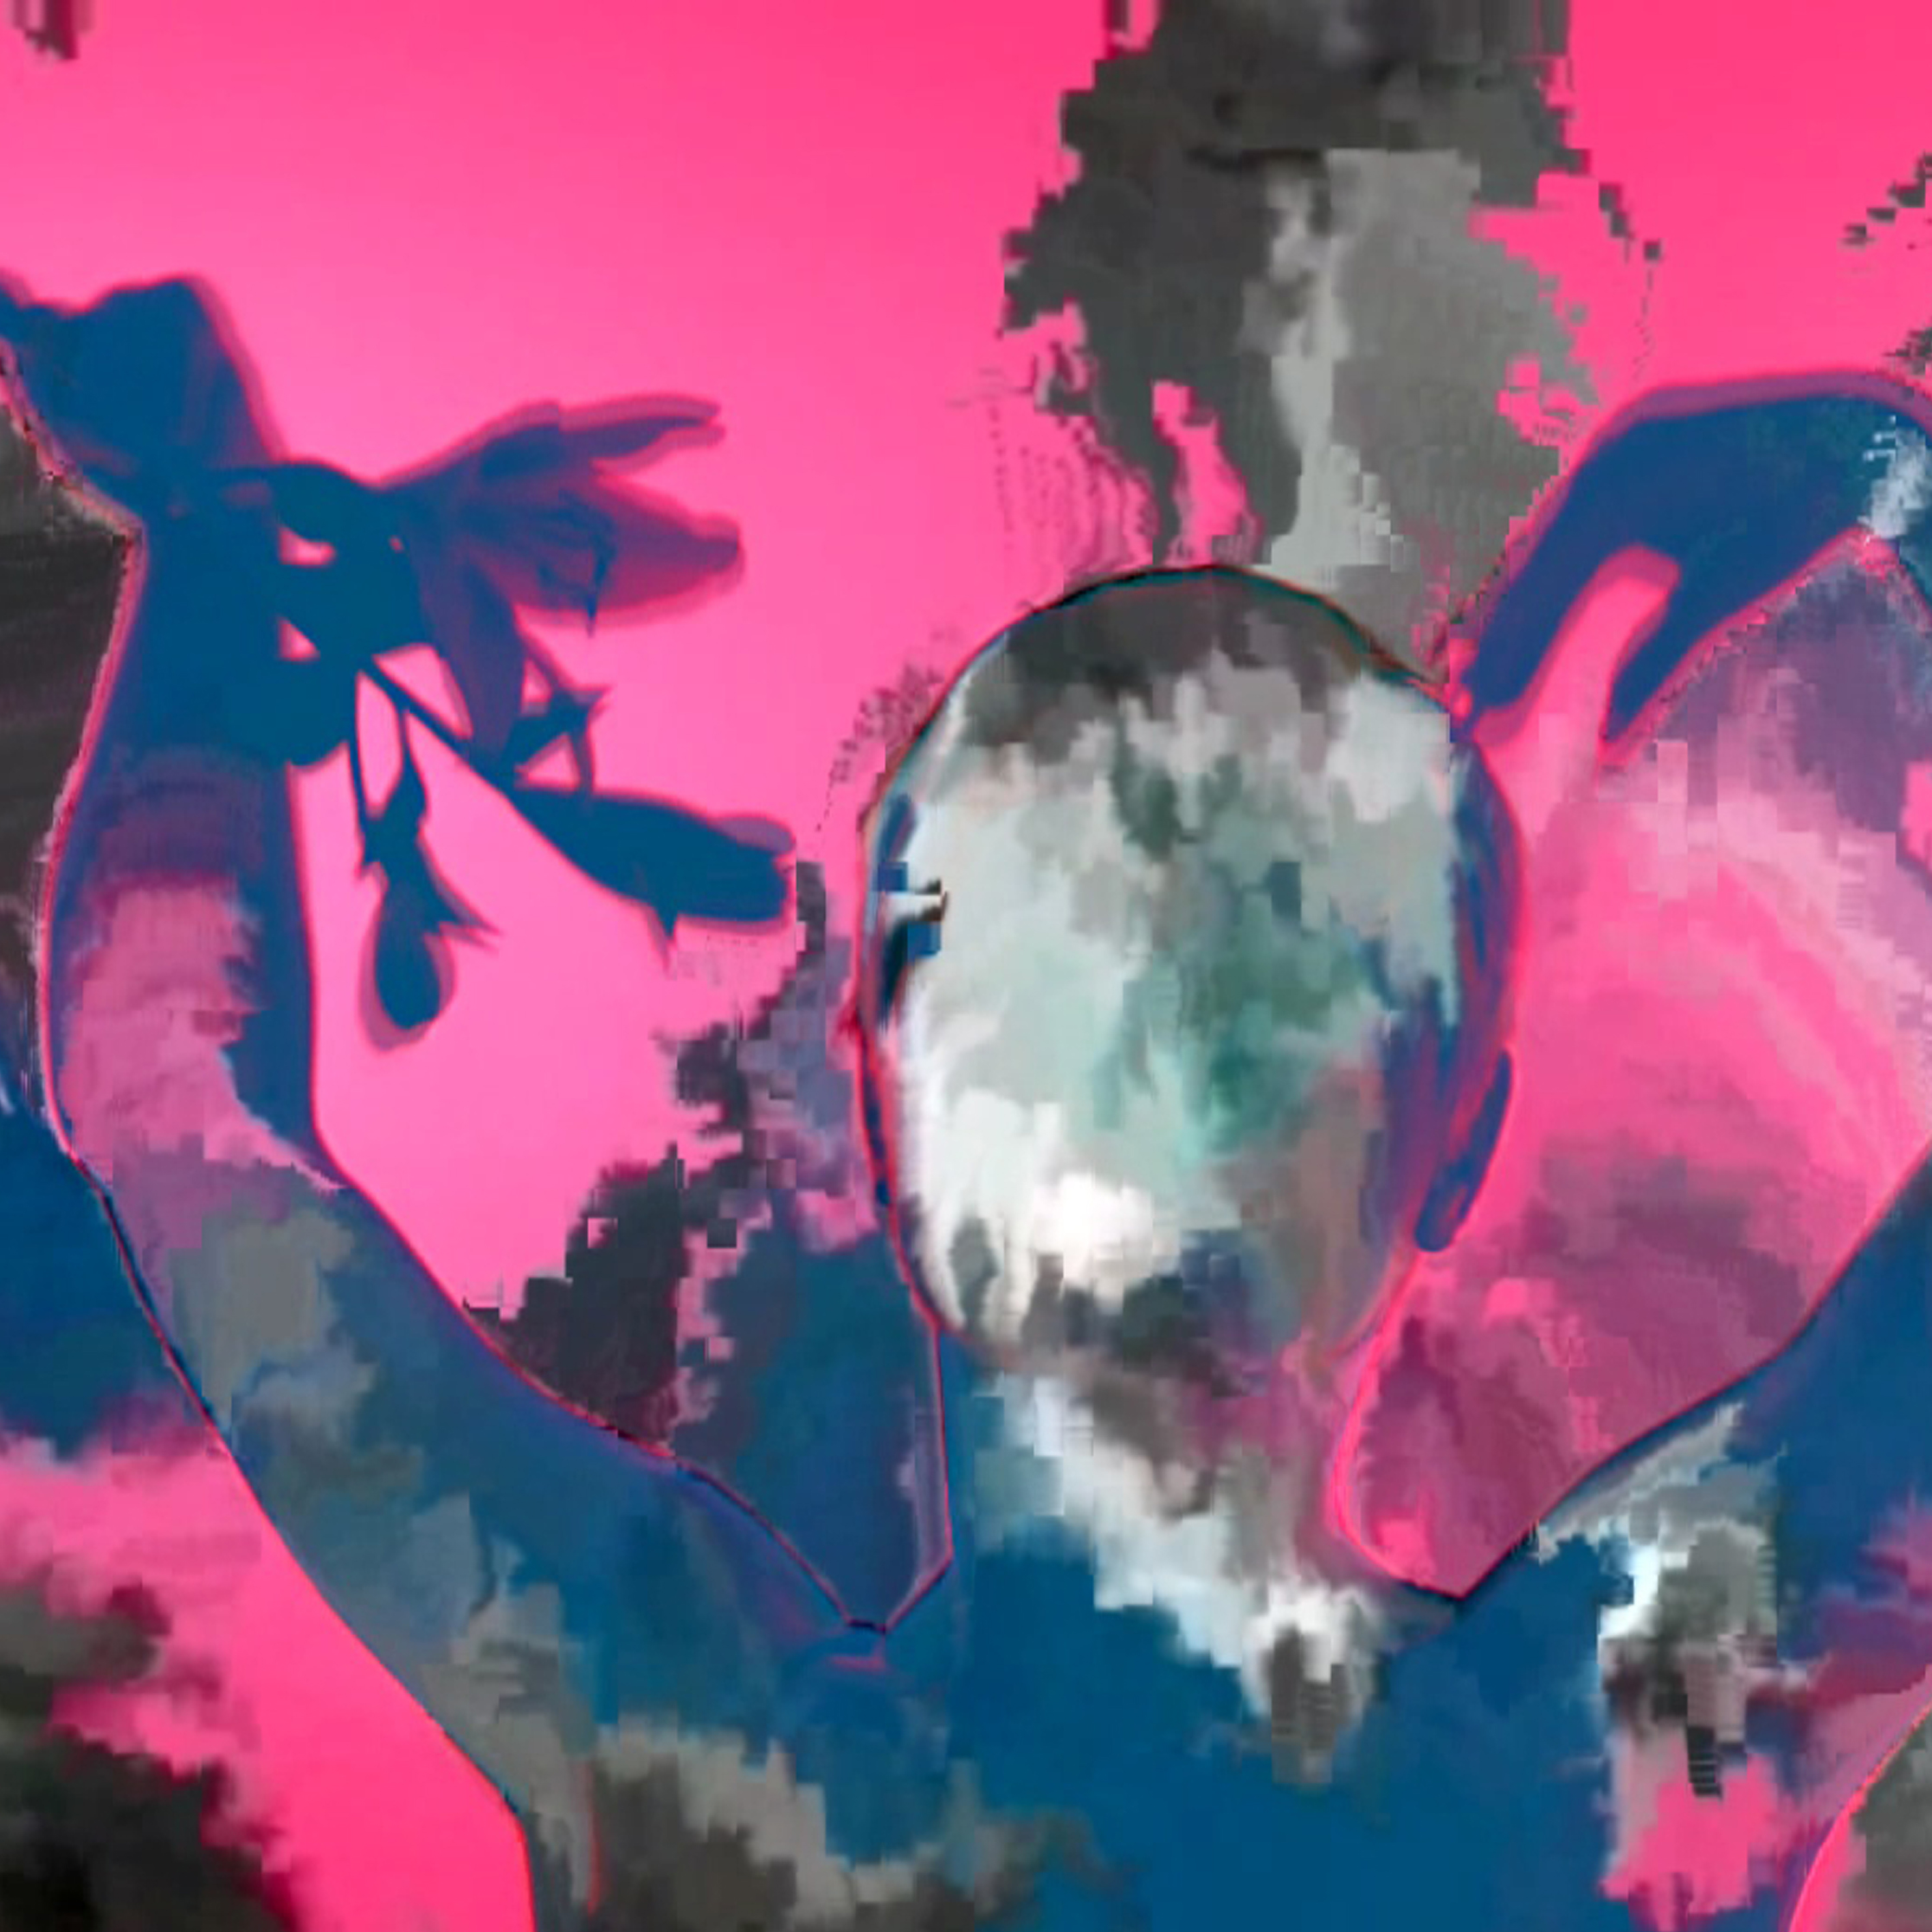 Detail from the digital film showing a pixelated image of a person dancing